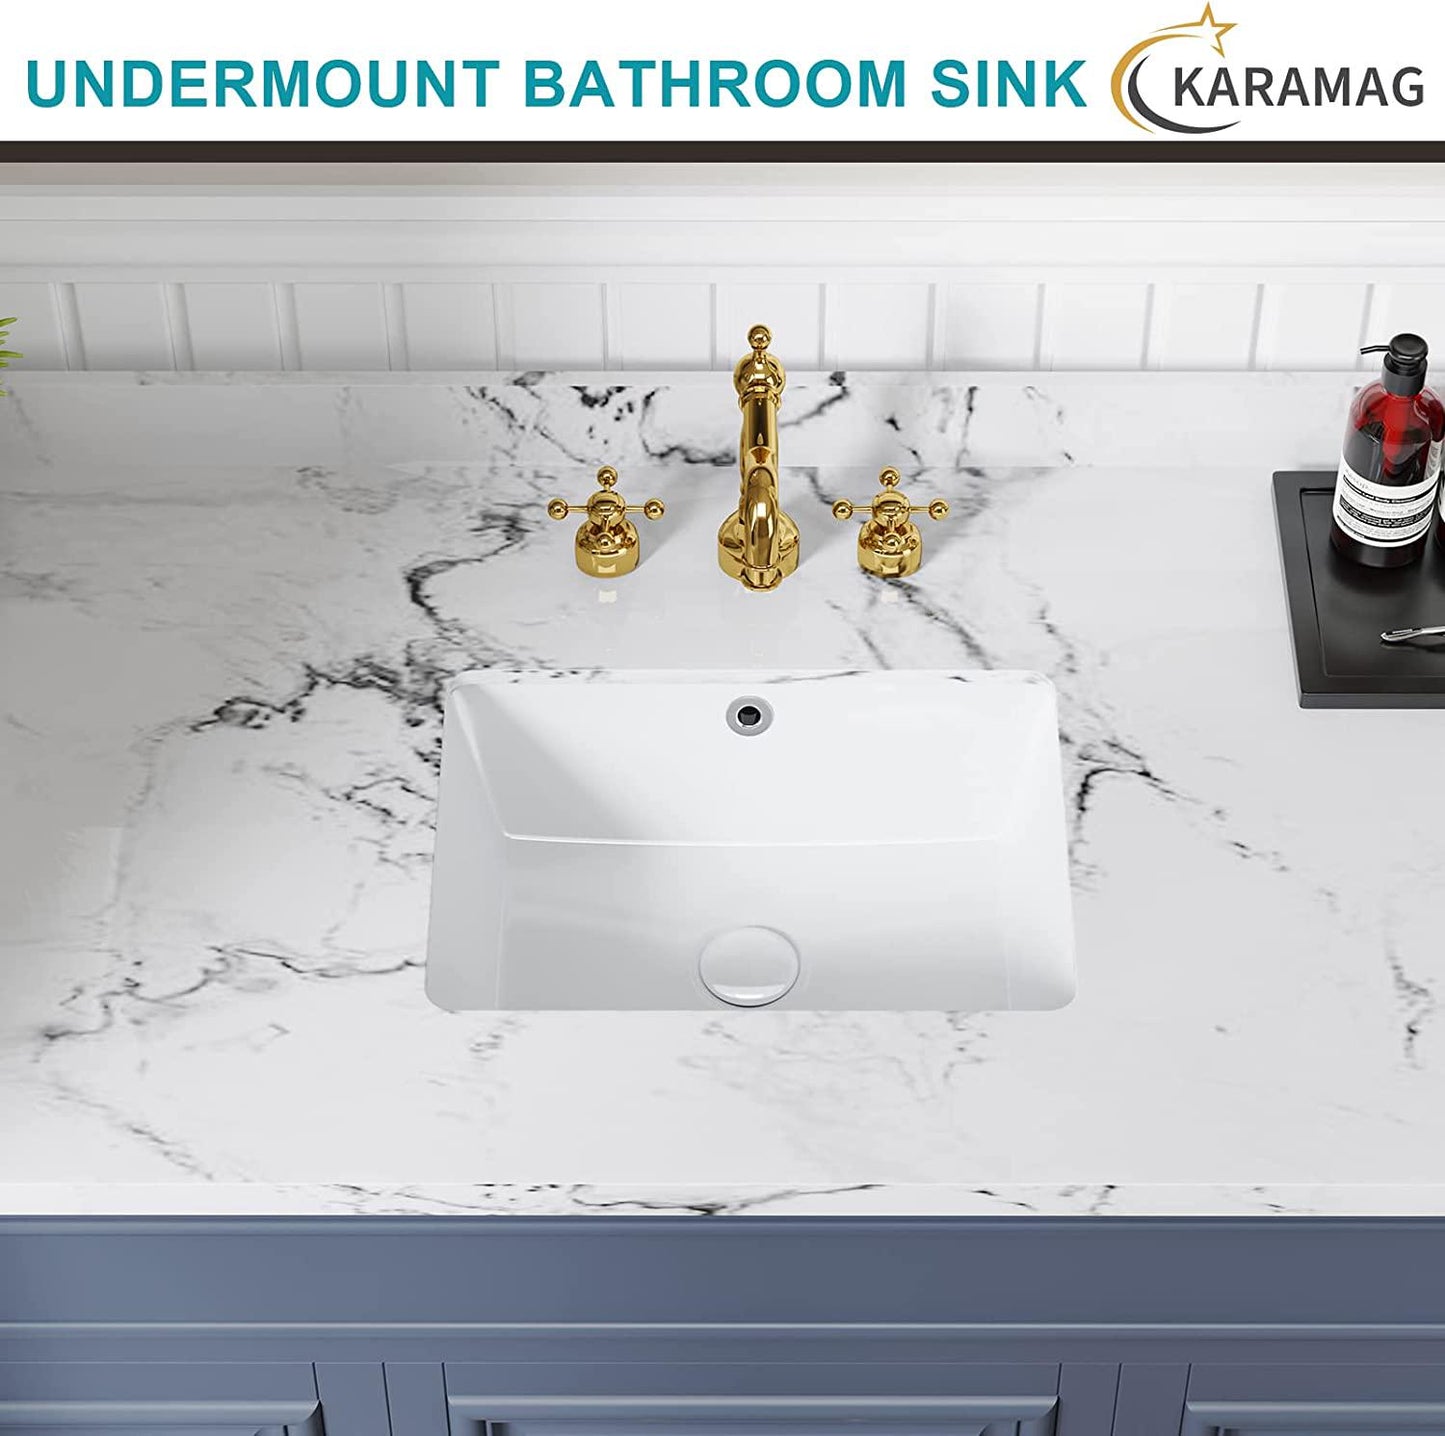 16 Inch Undermount Bathroom Sink Small Rectangle Undermount Sink White Ceramic Under Counter Bathroom Sink with Overflow (15.70 x11.69 )